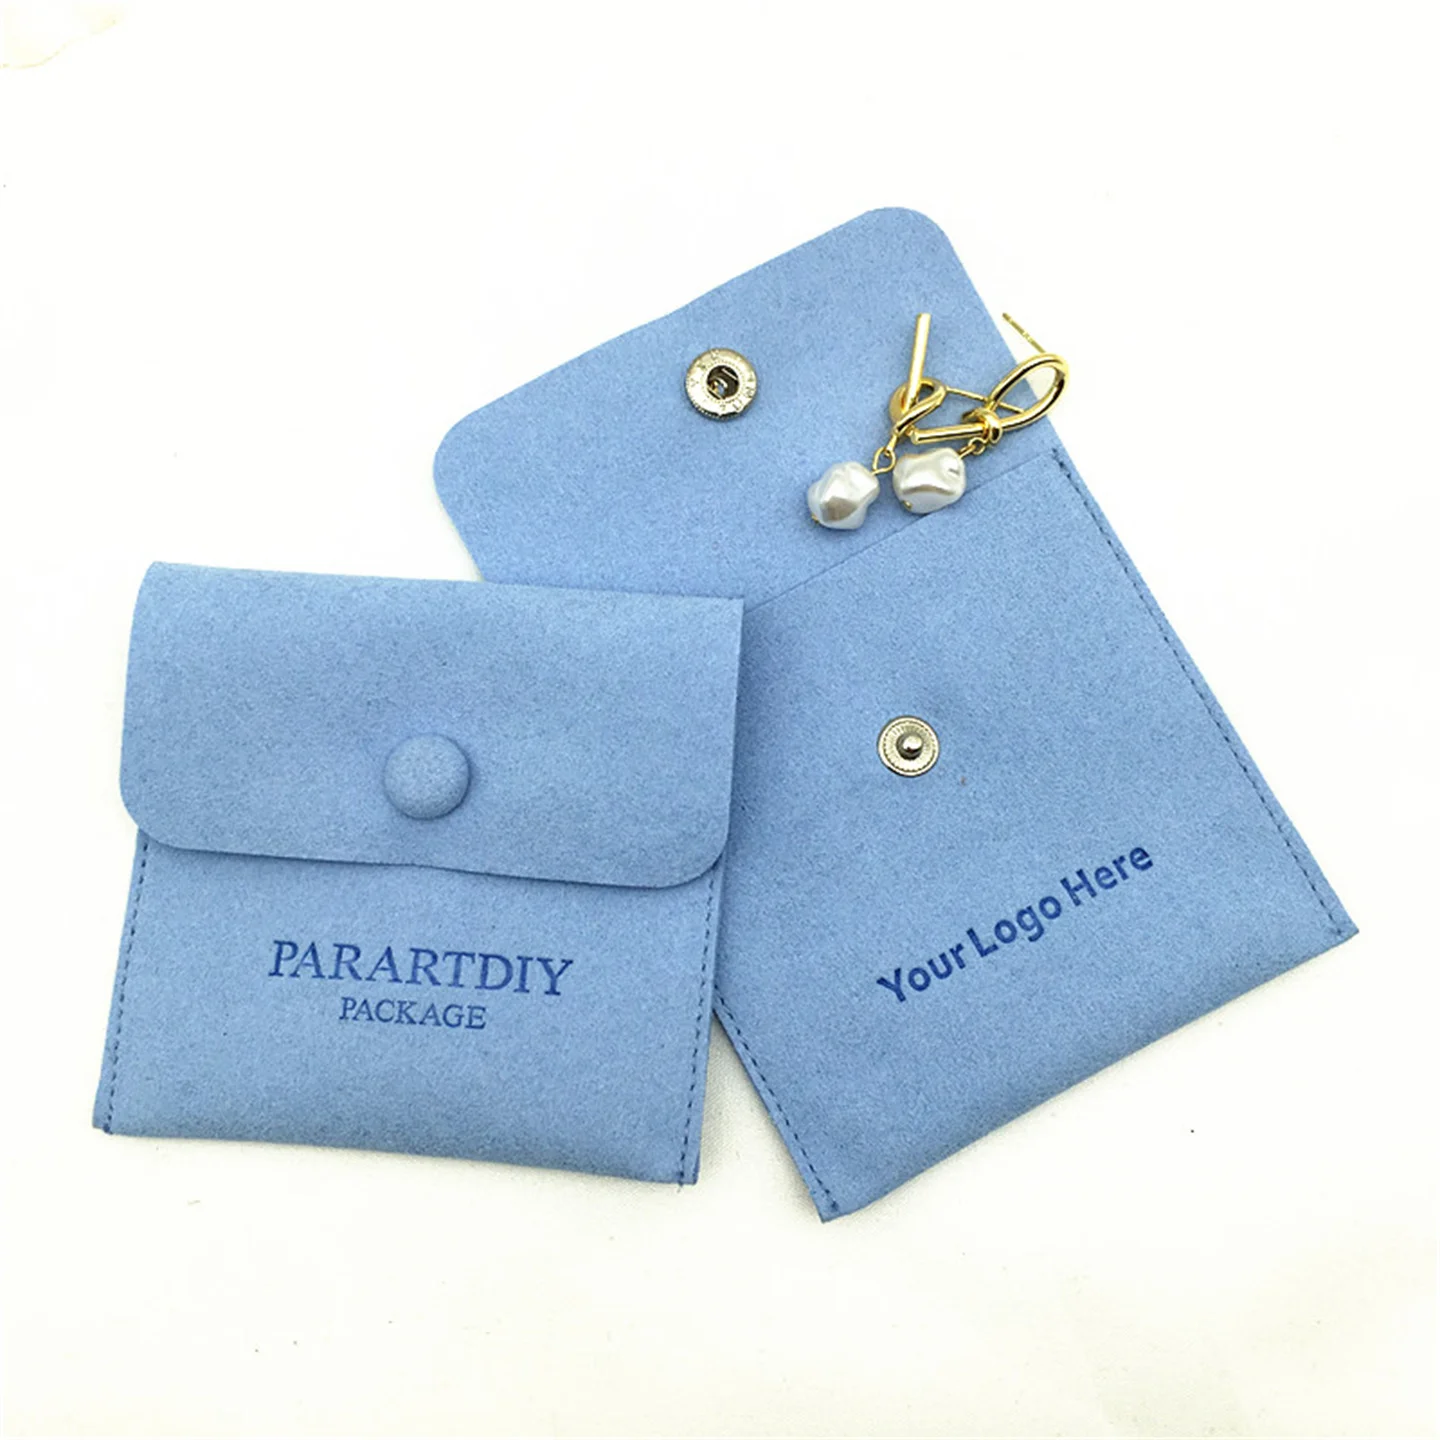 50pcs Blue custom jewelry package supplies personalize logo pouch bag printed small necklace packaging bag with button wholesale mikrotik 12v 5a internal power supply for ccr1016 r2 models with dual power supplies